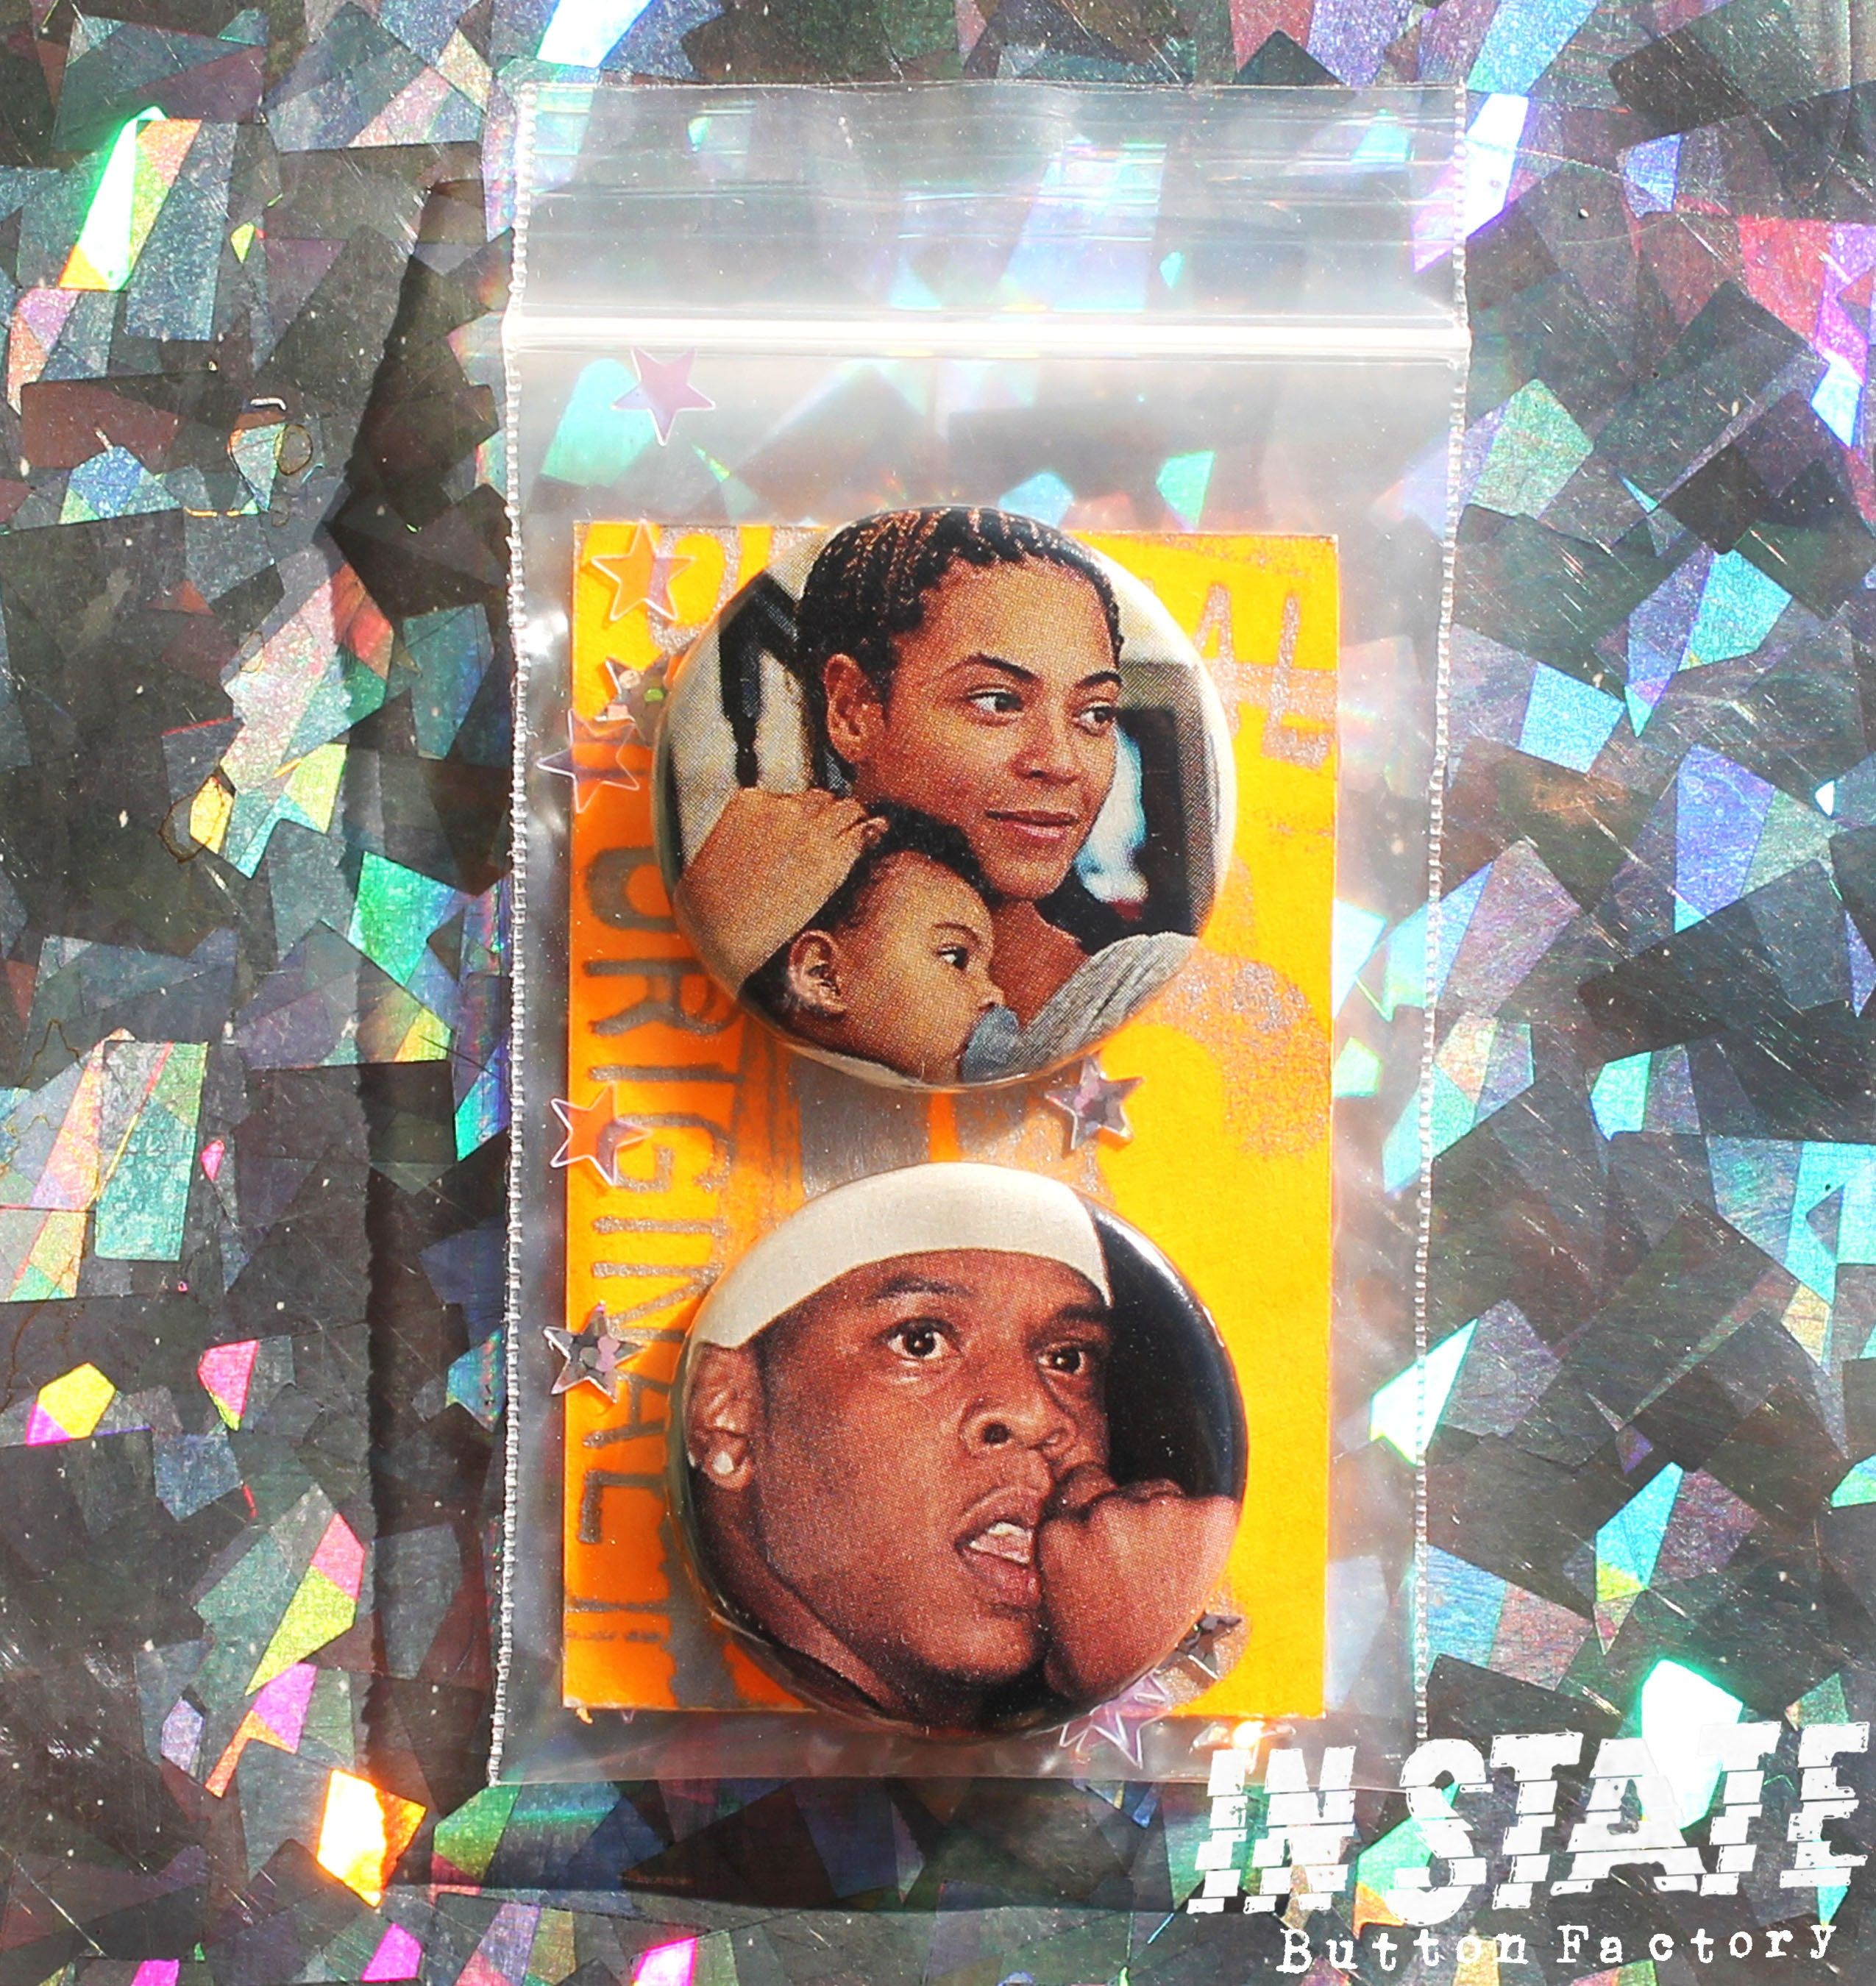 A set of two buttons in a plastic bag. The top button has a photo of Beyoncé holding her head to her chest, and the bottom button has a photo of Jay-Z with his tongue out. - Beyonce